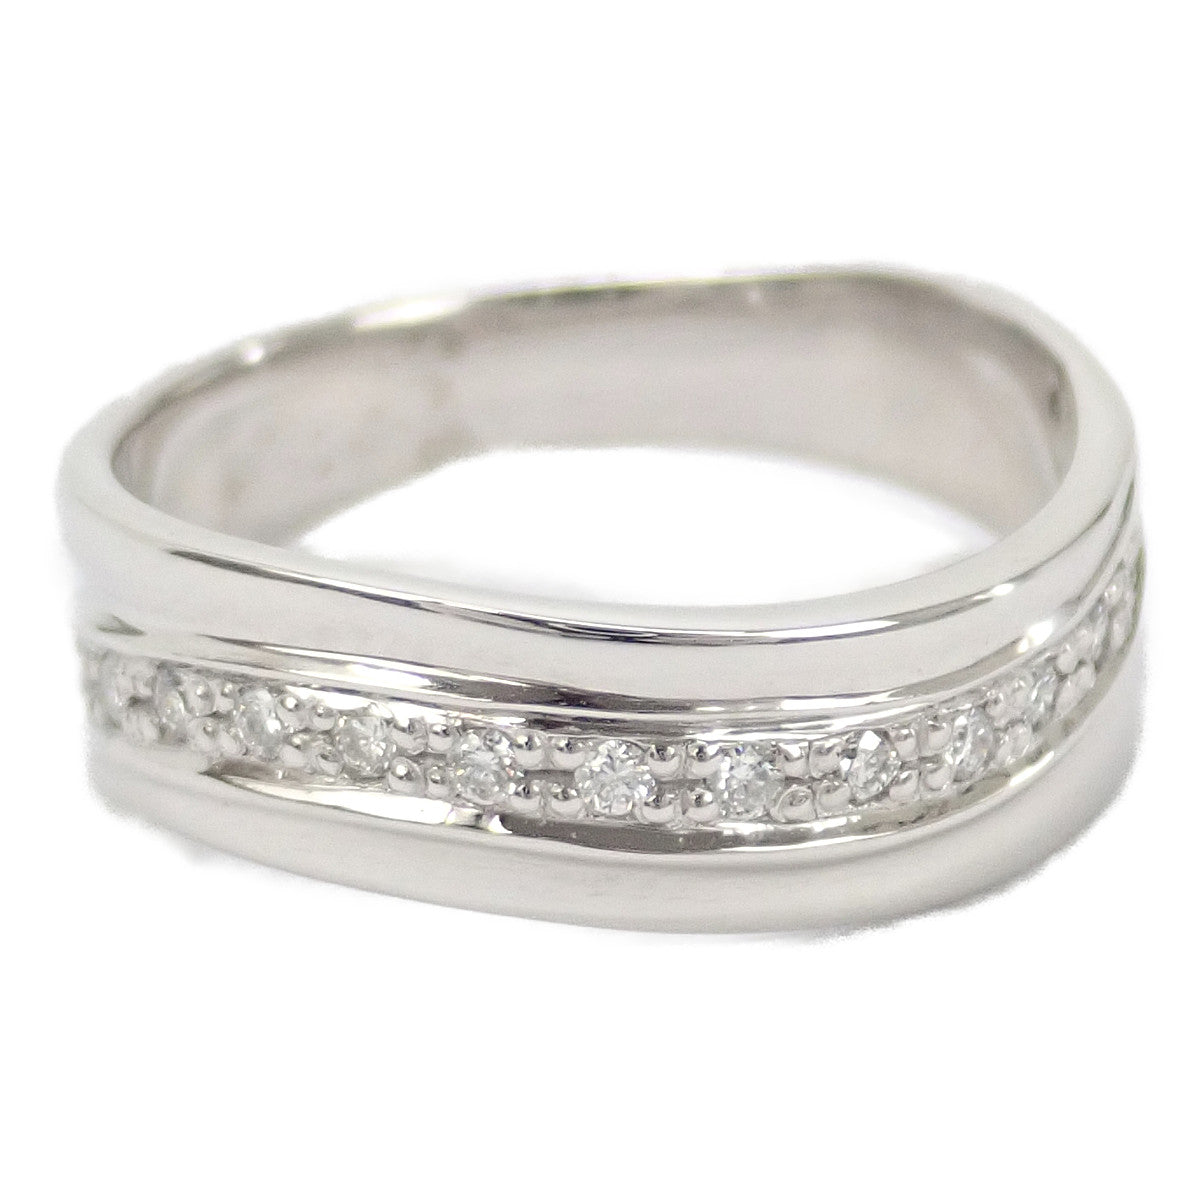 [LuxUness]  Ladies' K18WG Ring with Diamond (0.12ct) in Silver – Size Approx 9 – Used  in Excellent condition